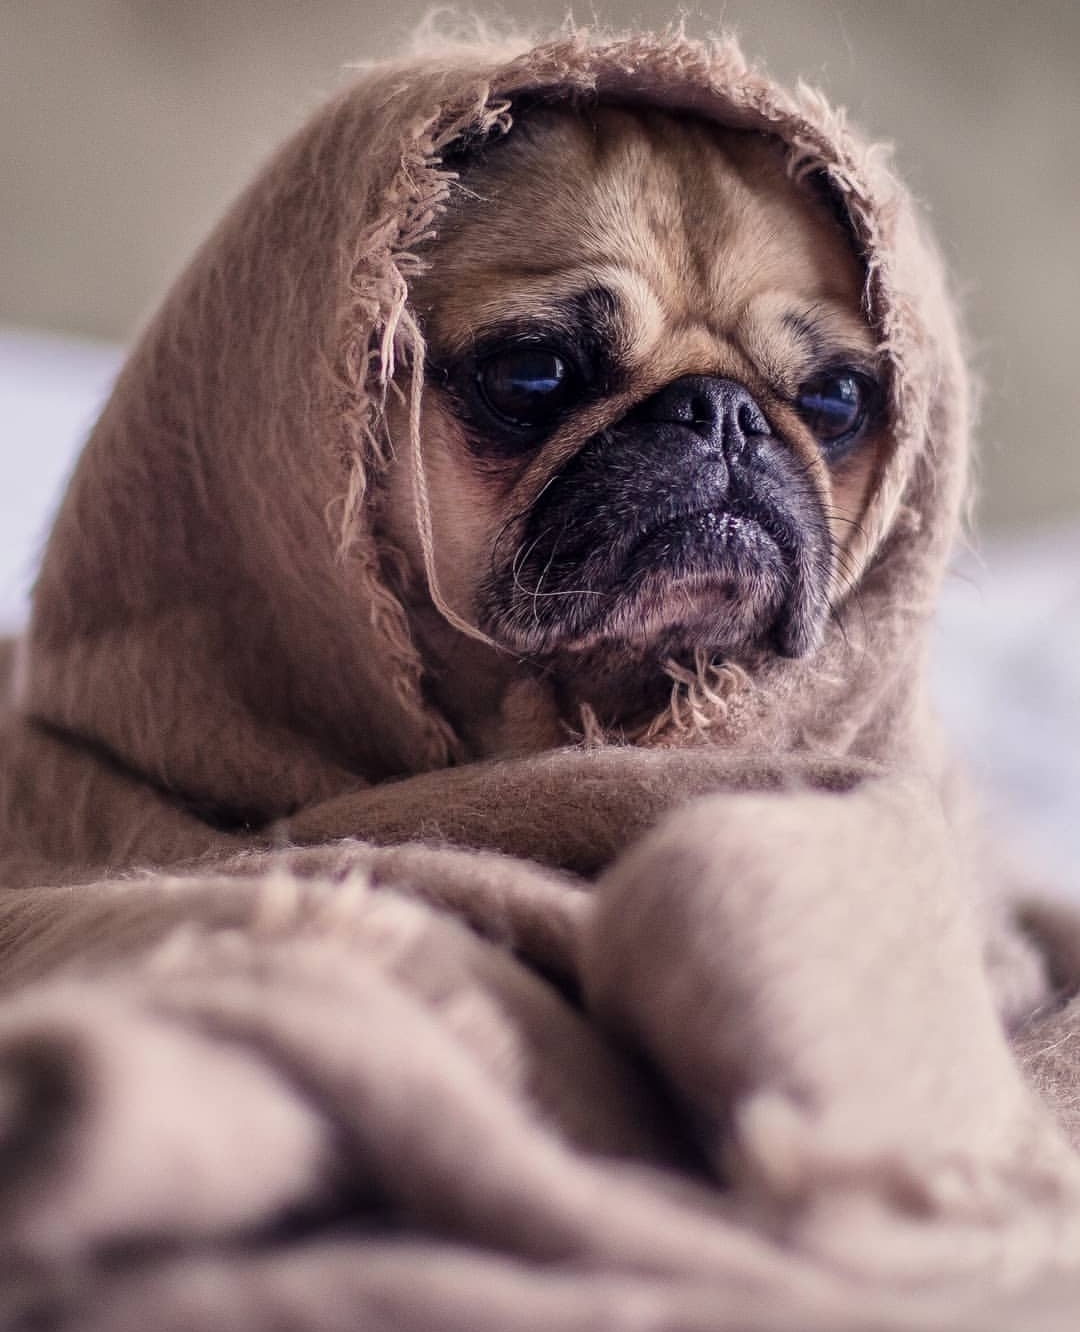 Pug wrapped in a brown blanket while lying on the bed